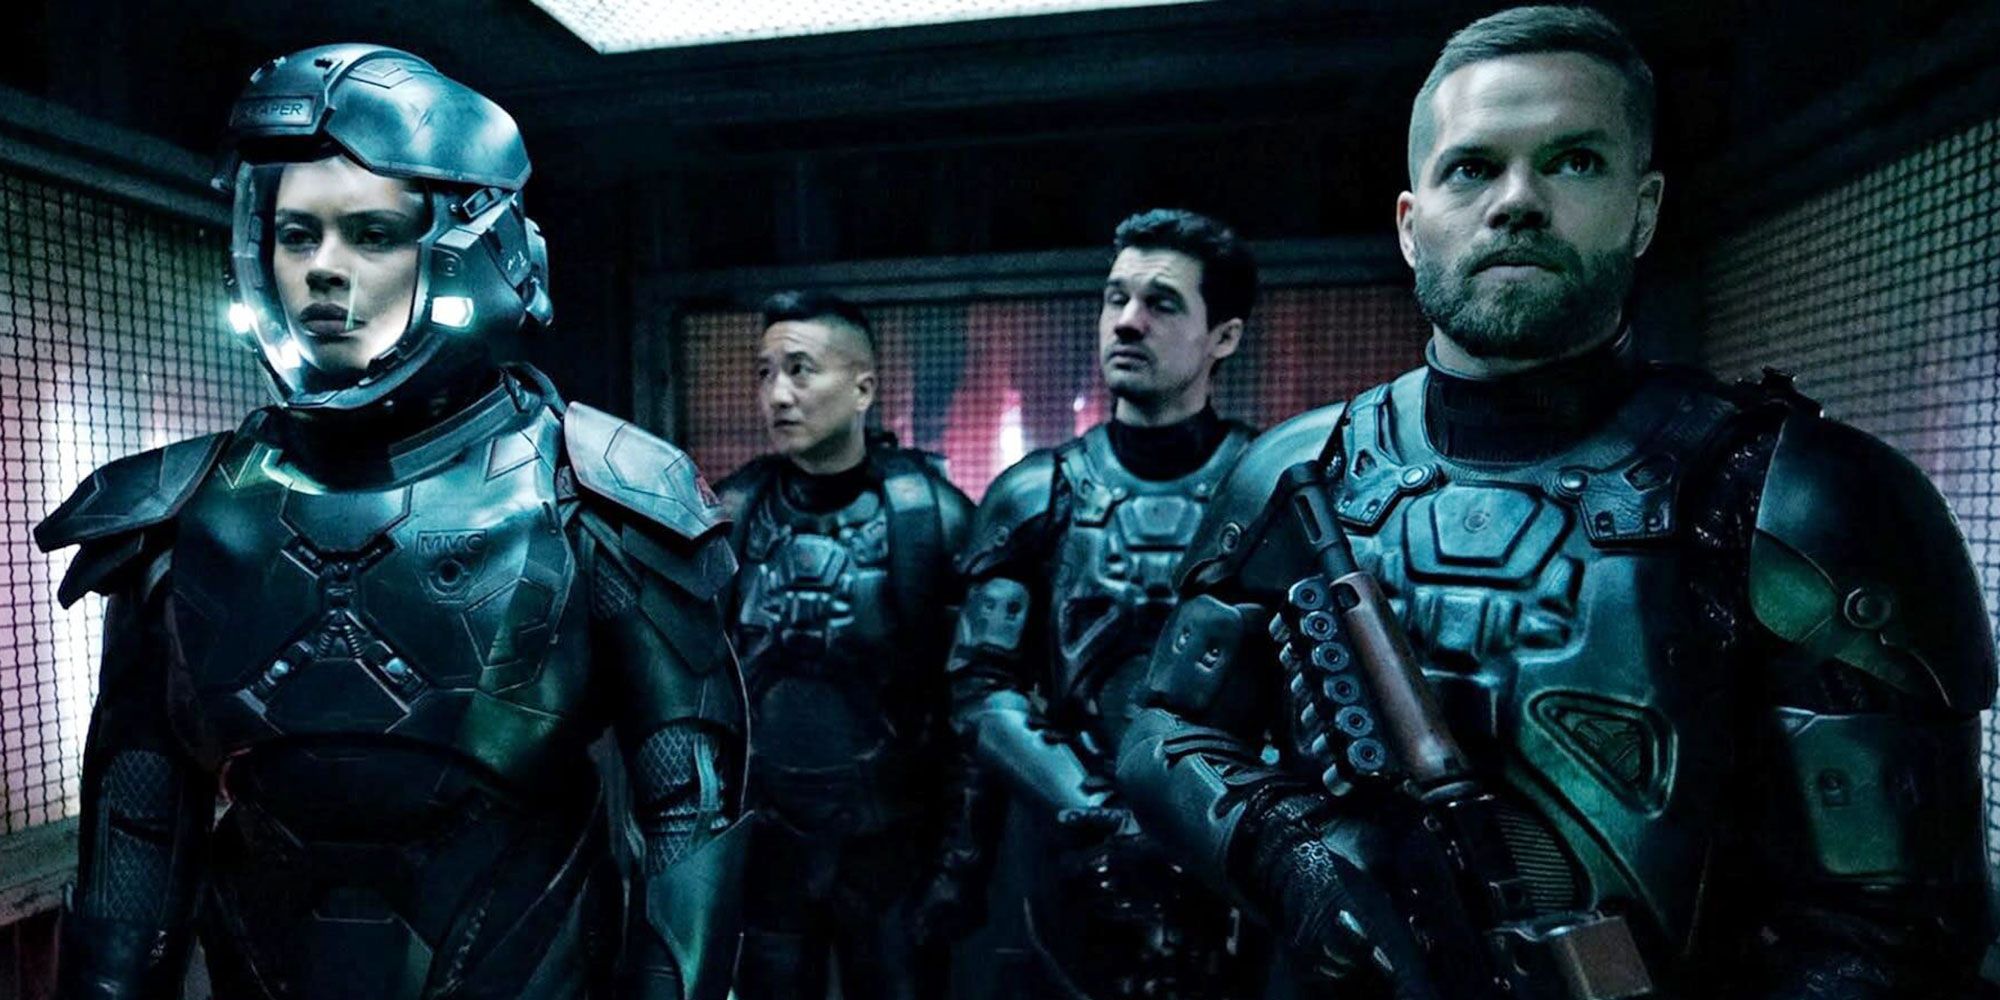 The Expanse characters in combat suits.